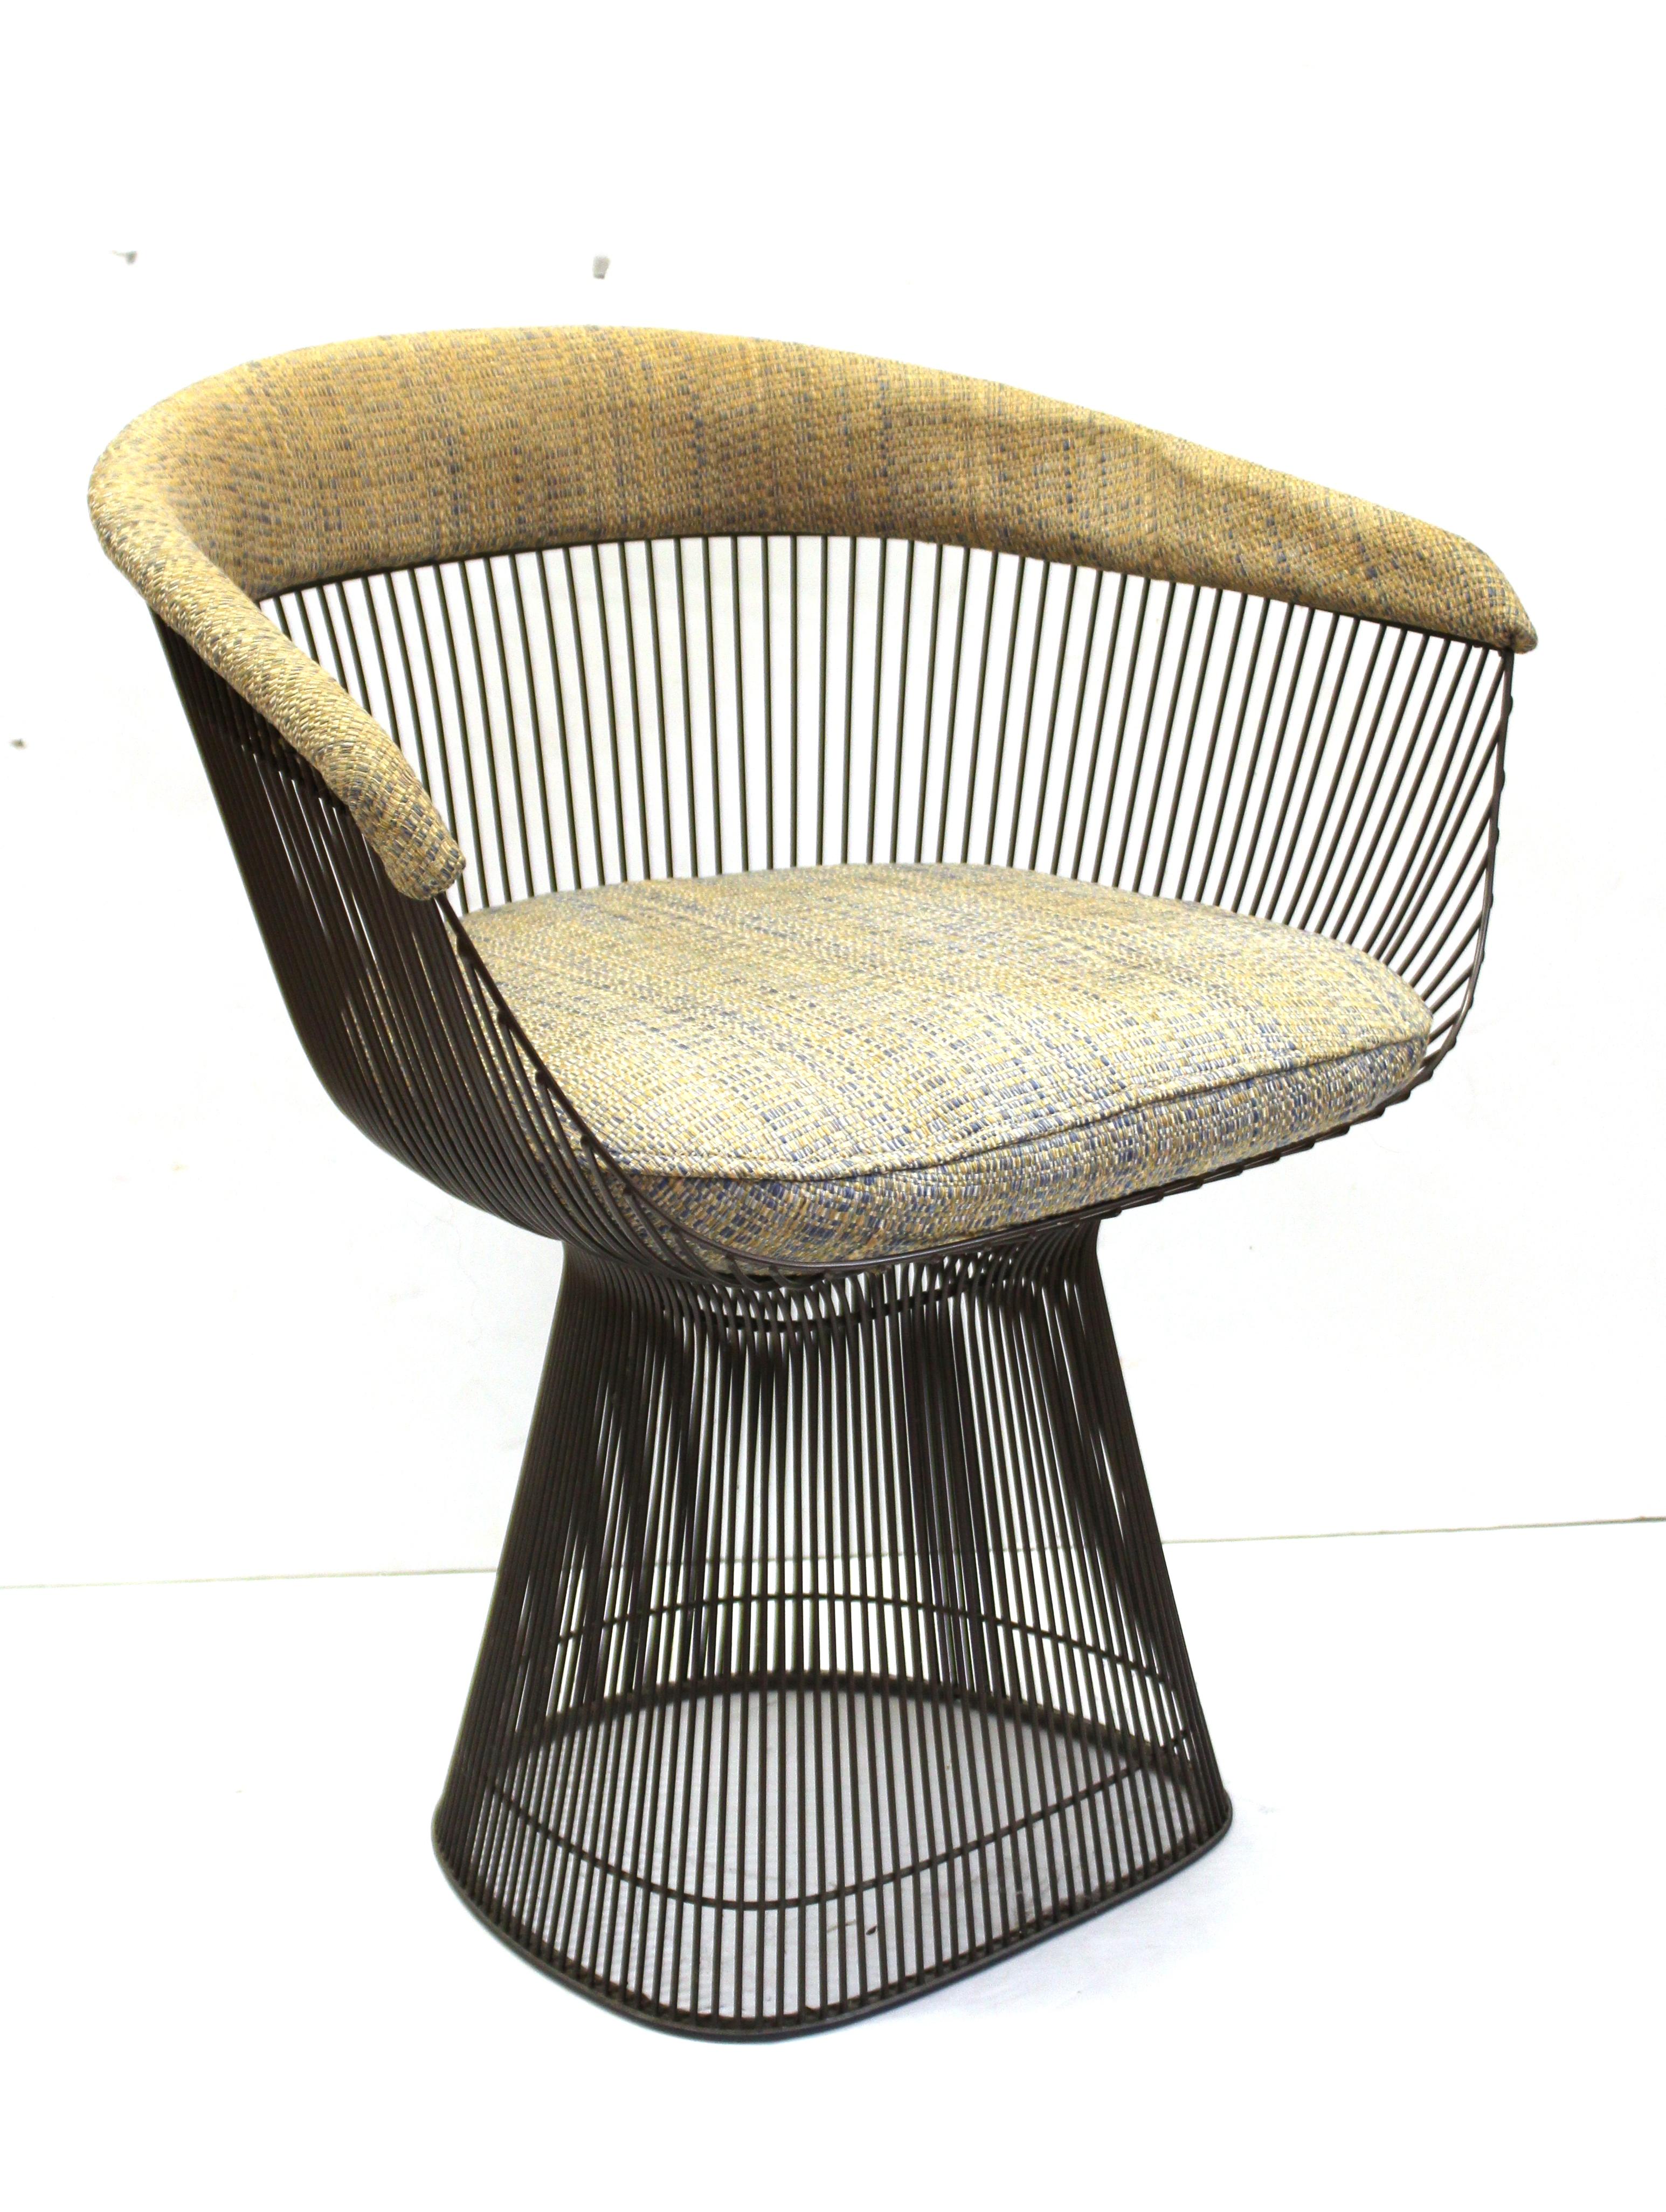 American Mid-Century Modern set of three wire armchairs designed by Warren Platner for Knoll International. The set has a bronze-plated steel wire structure and comes with its original upholstery and Knoll labels on the bottom of the seat cushion